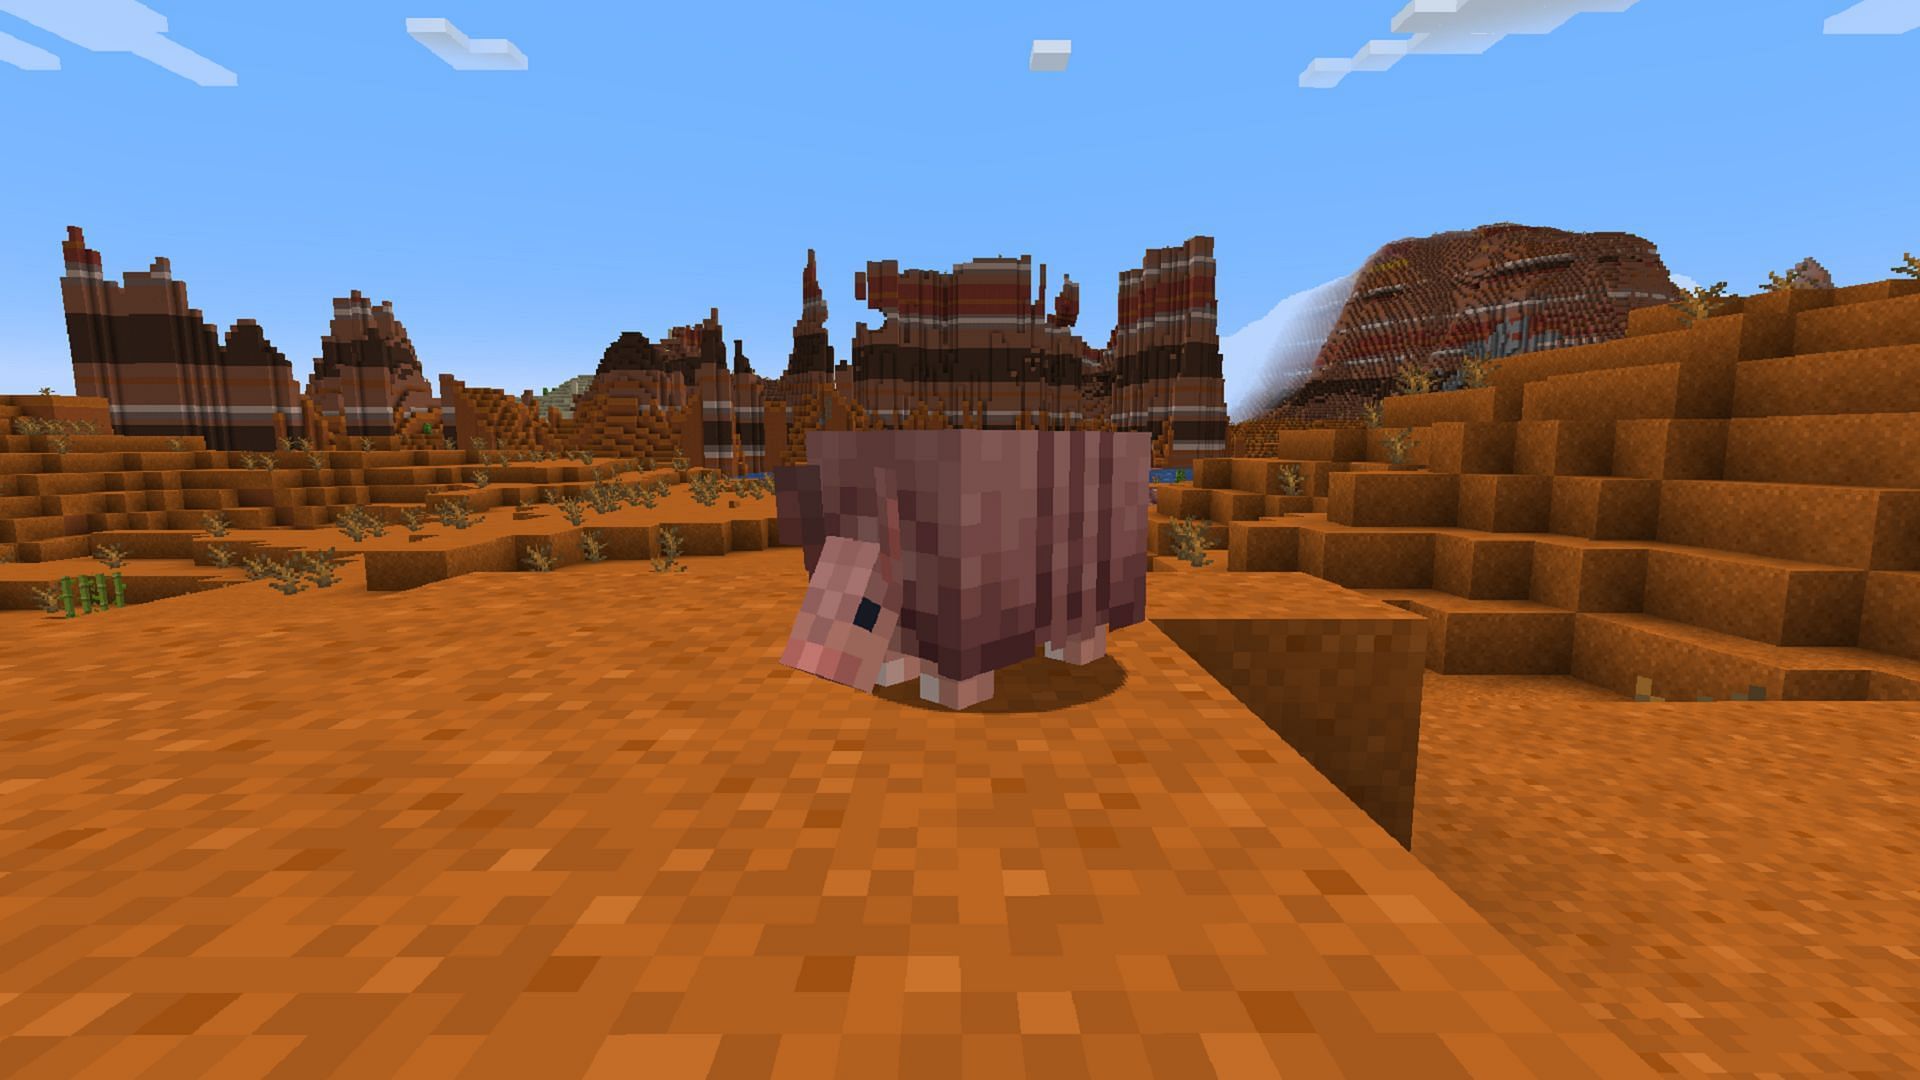 New Minecraft video calls armadillo the &quot;blockiest&quot; mob, but a few other mobs beg to differ